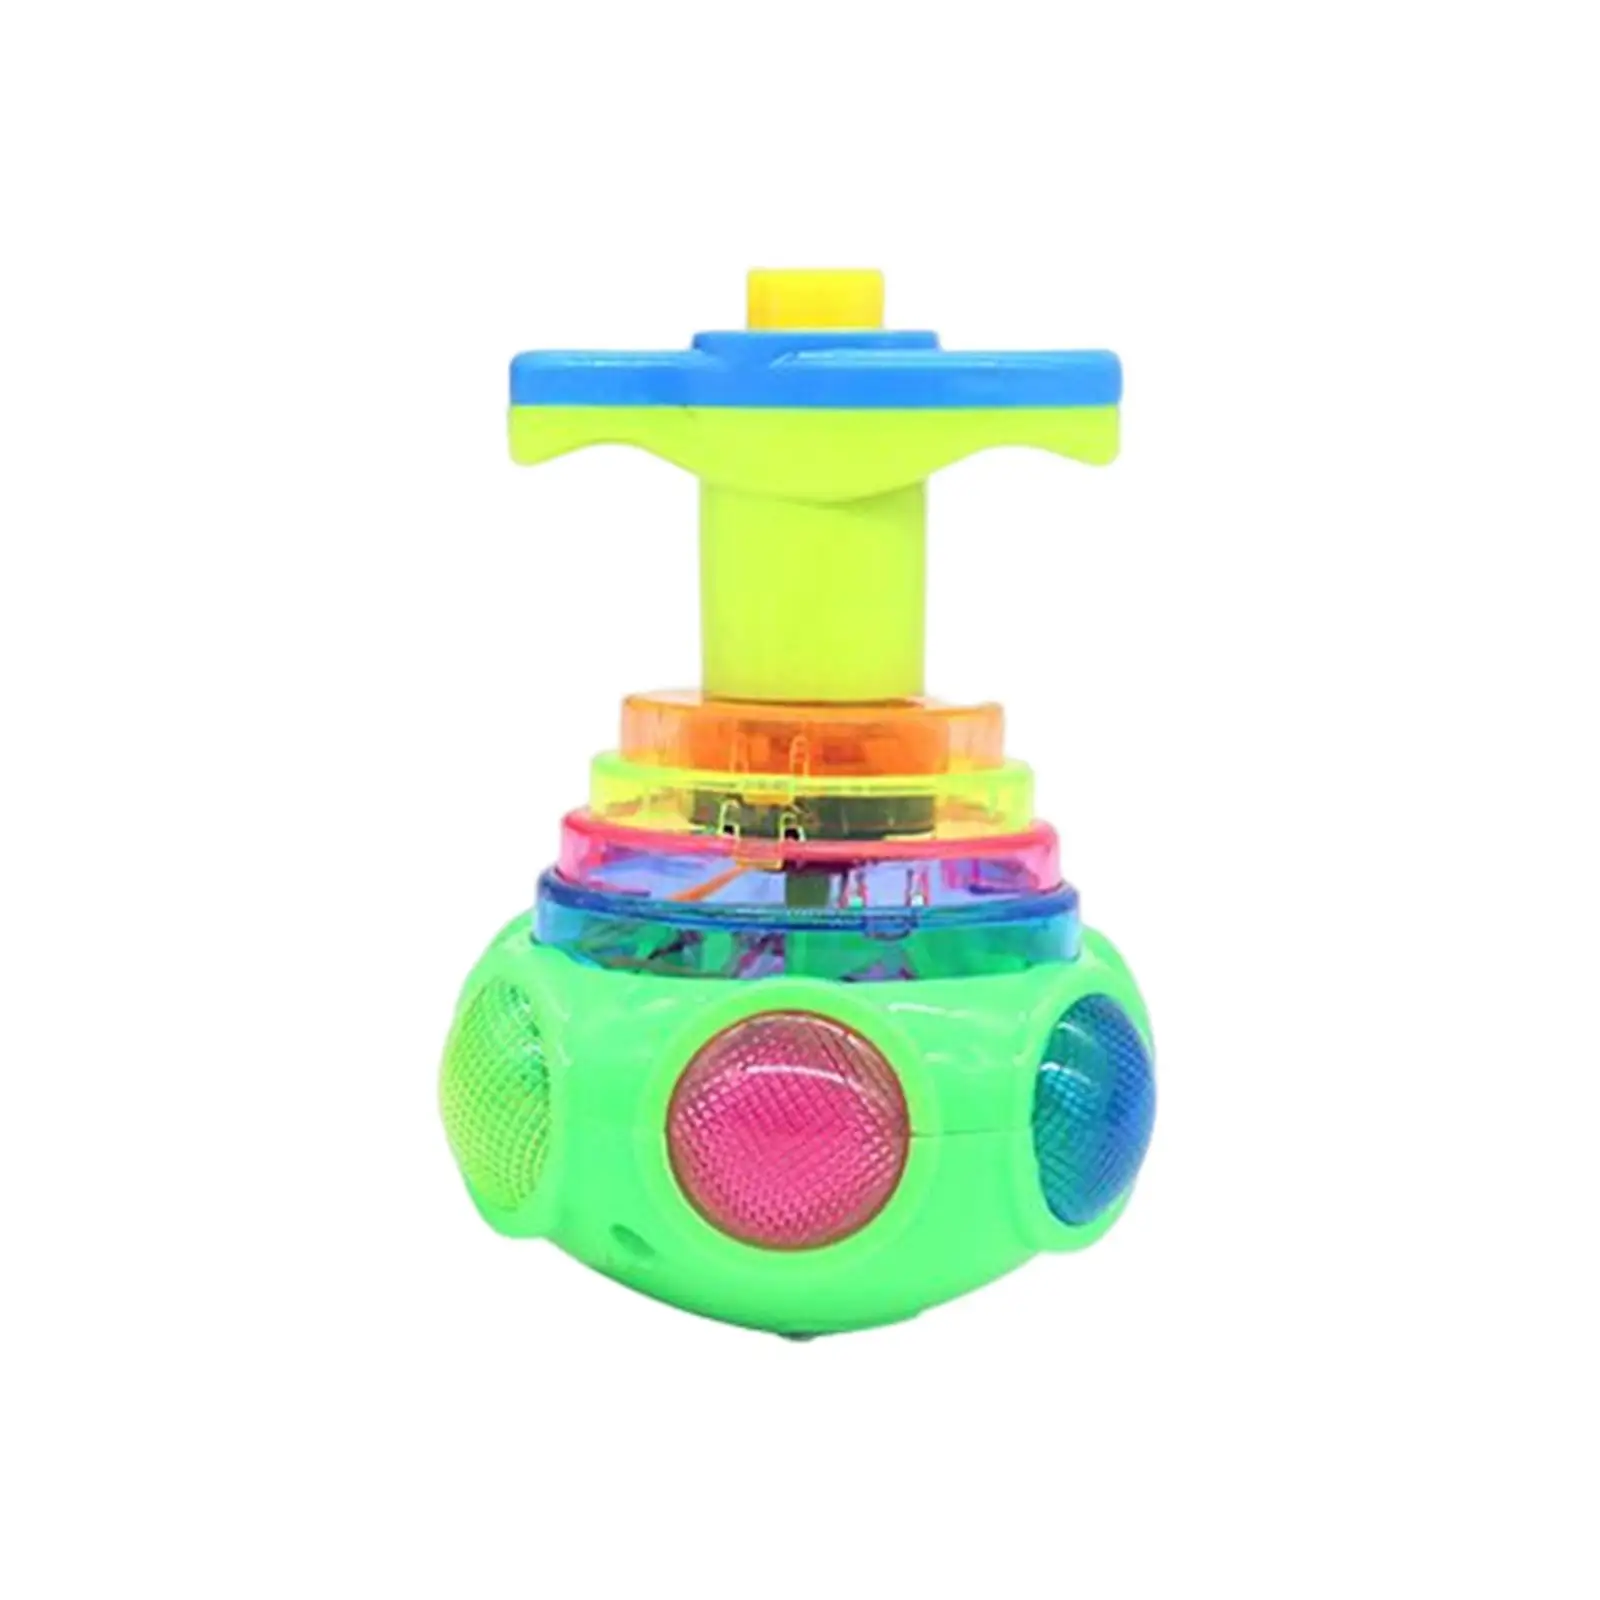 Spin Top Toy Gyro Peg Toy Spin Xmas Kids Gift Light and Music LED Music and